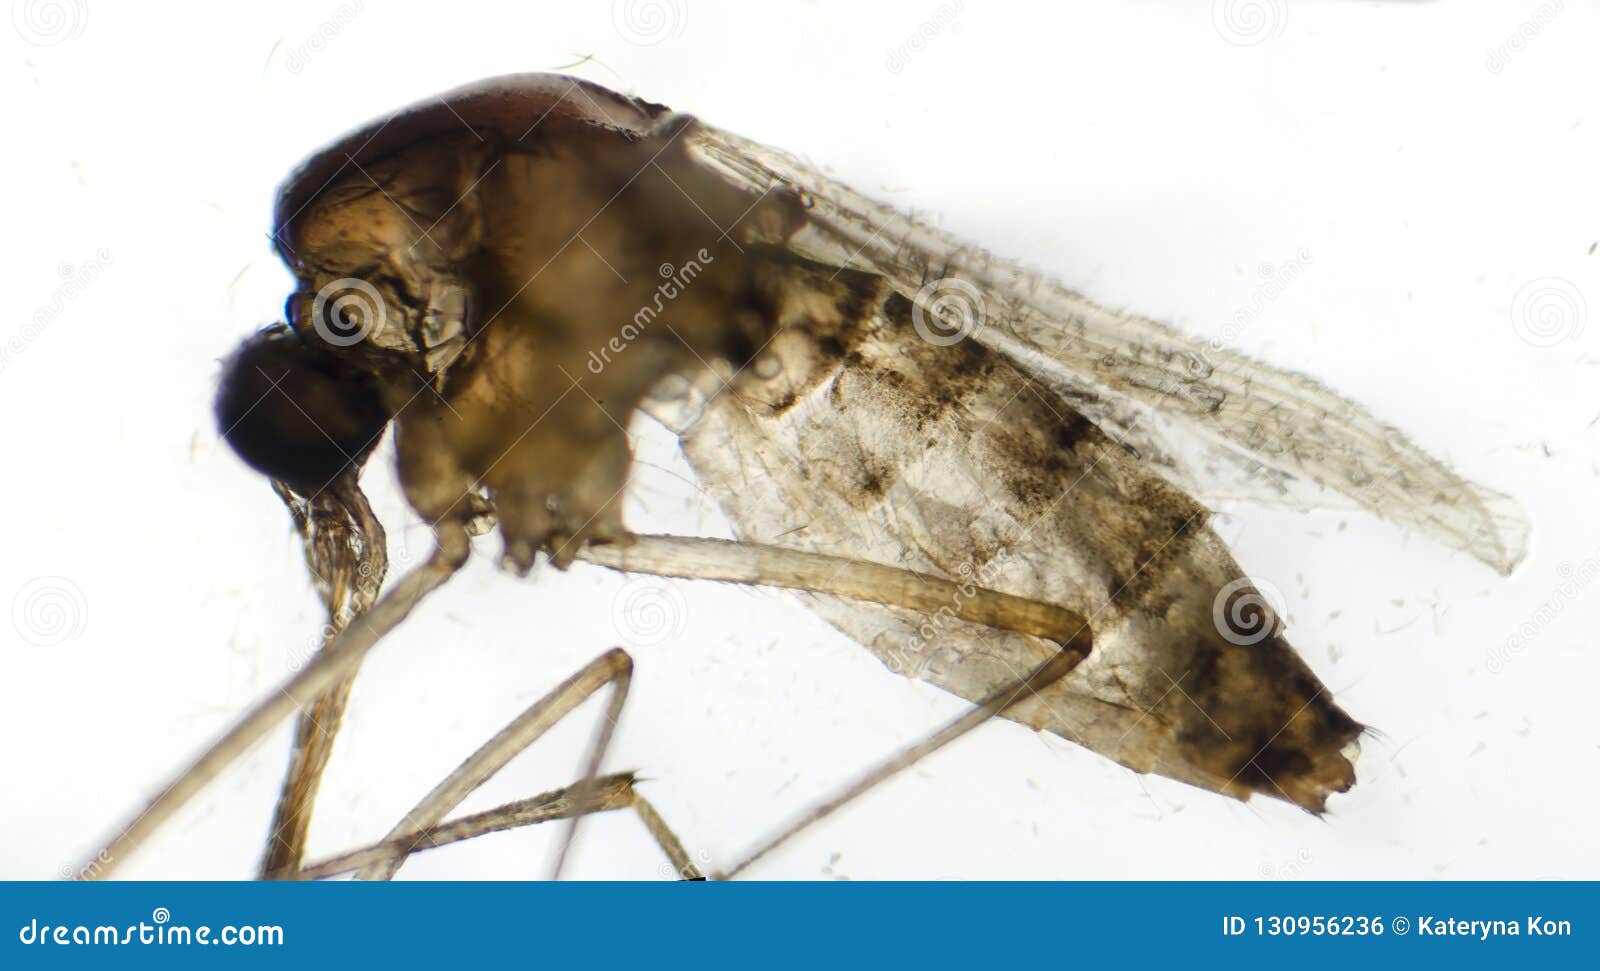 Mosquito Under Microscope Stock Photo Image Of Structure 130956236